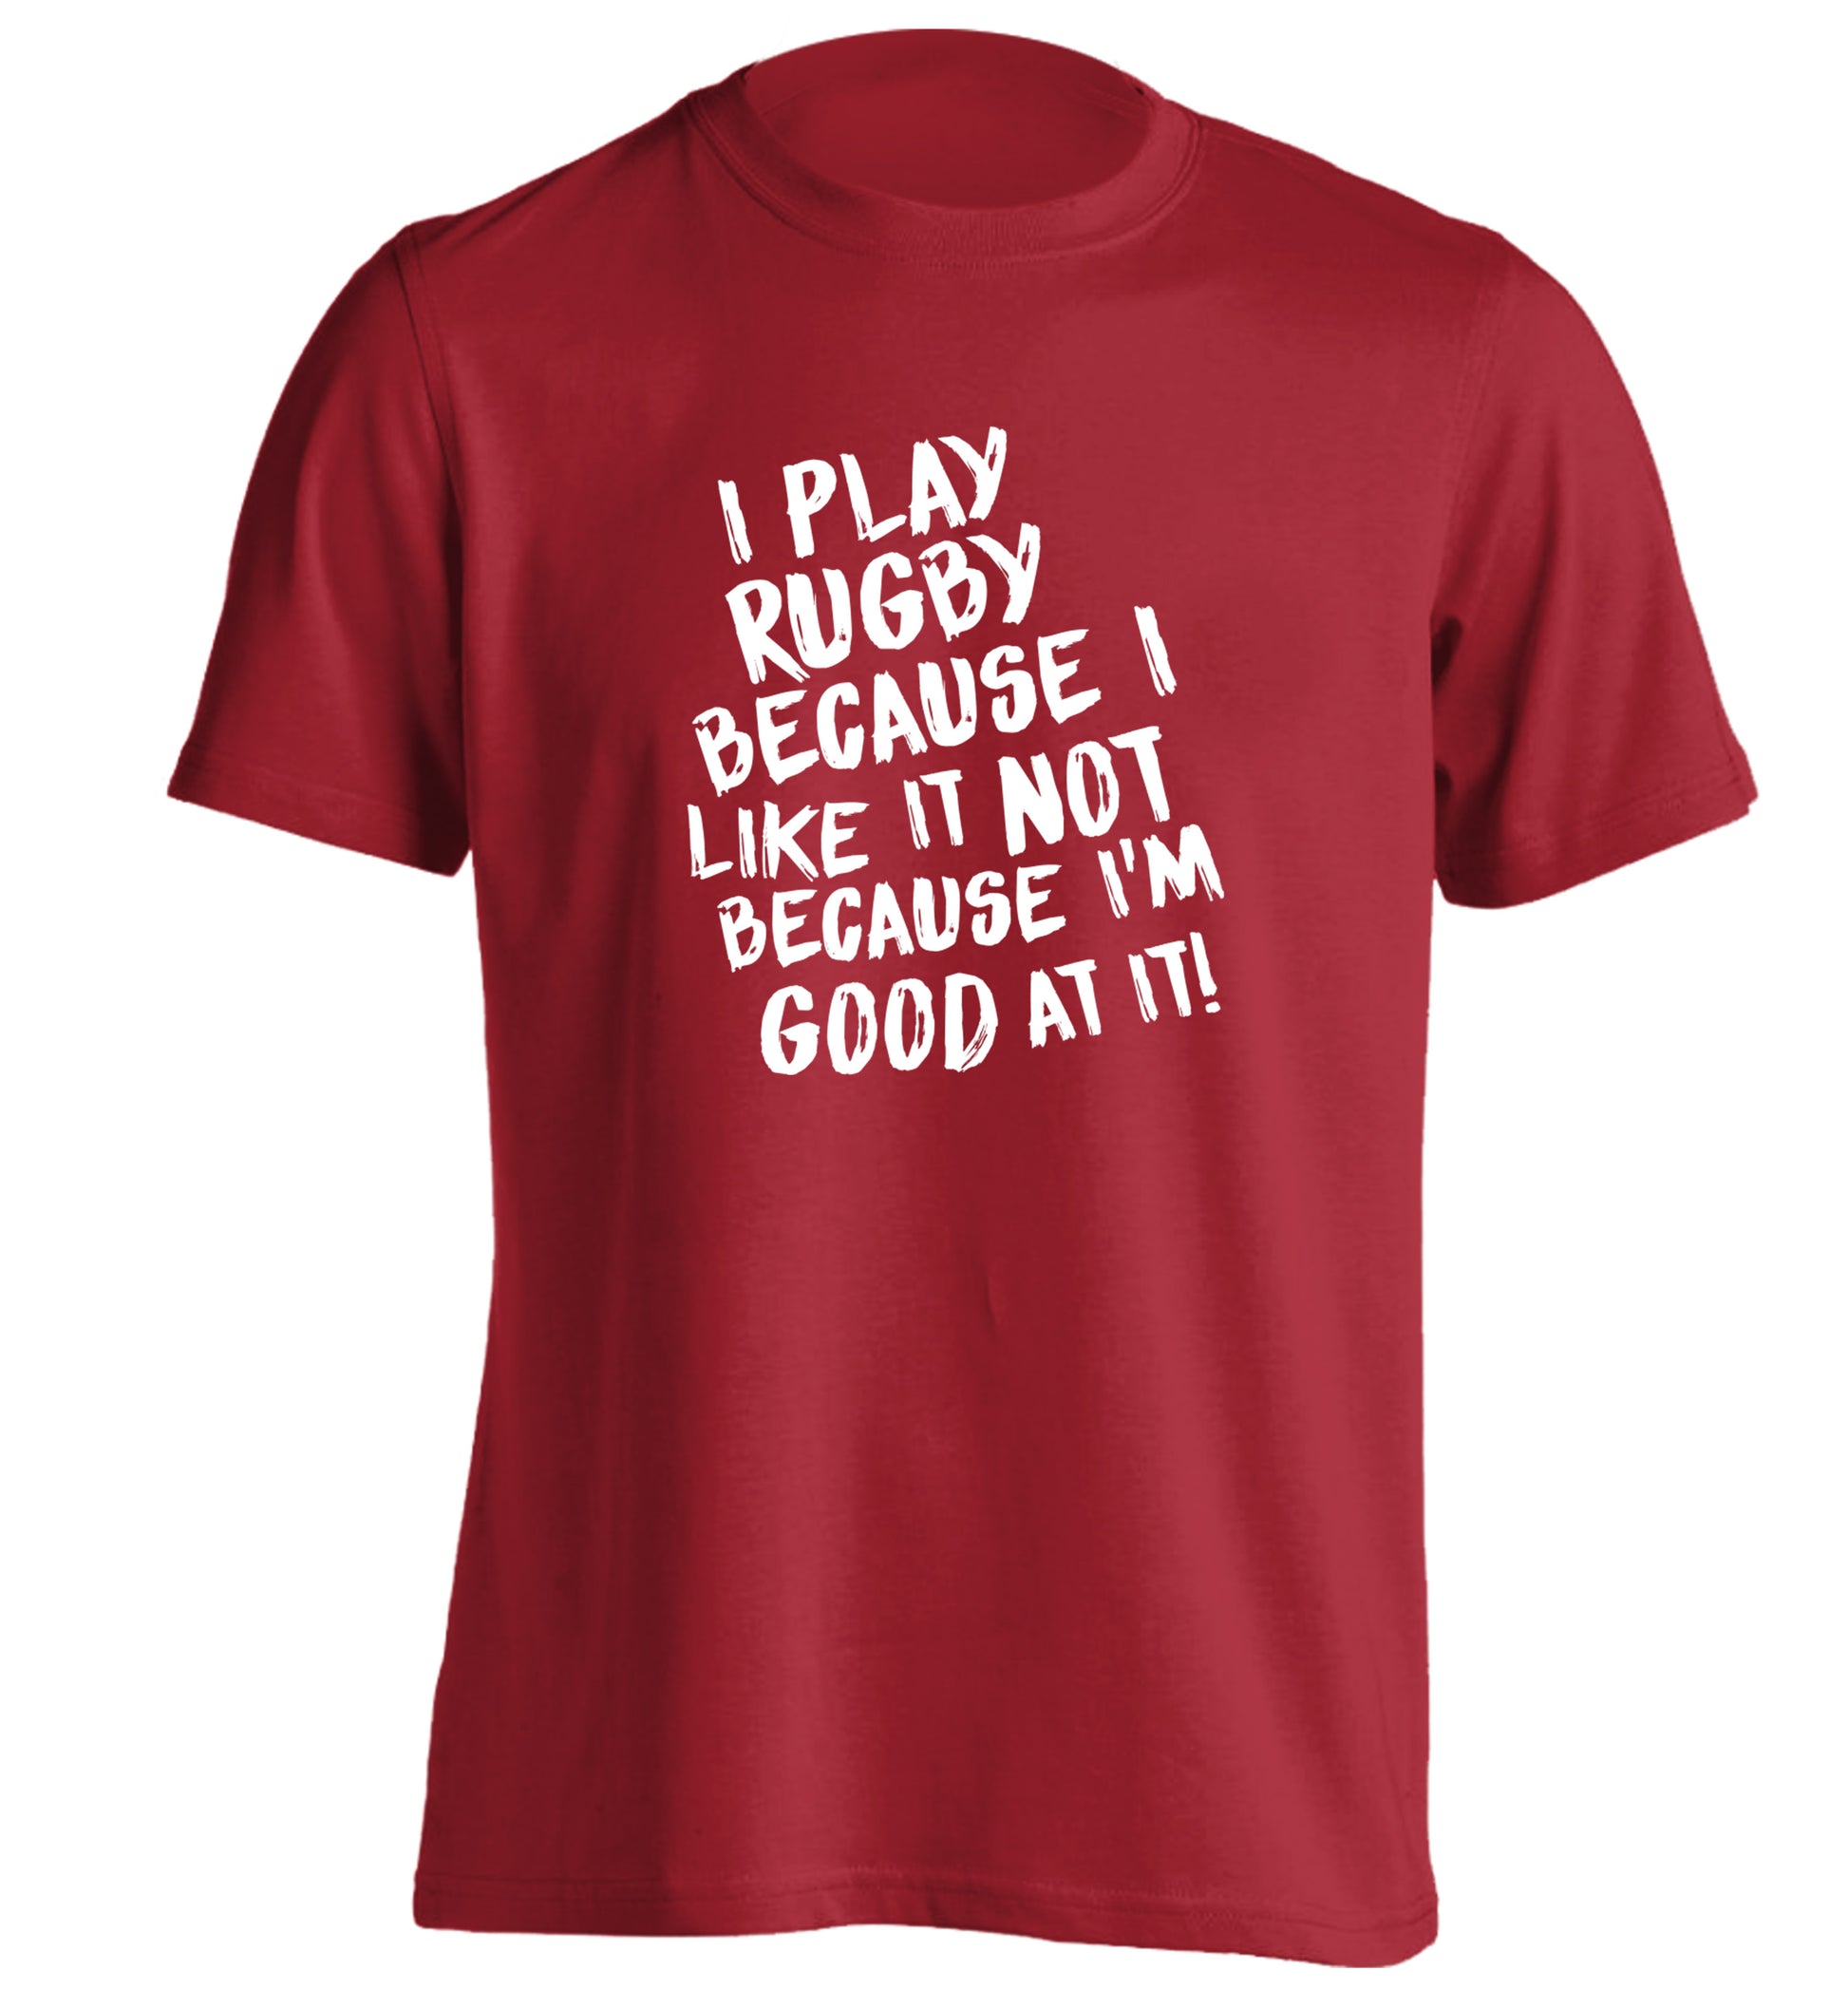 I play rugby because I like it not because I'm good at it adults unisex red Tshirt 2XL